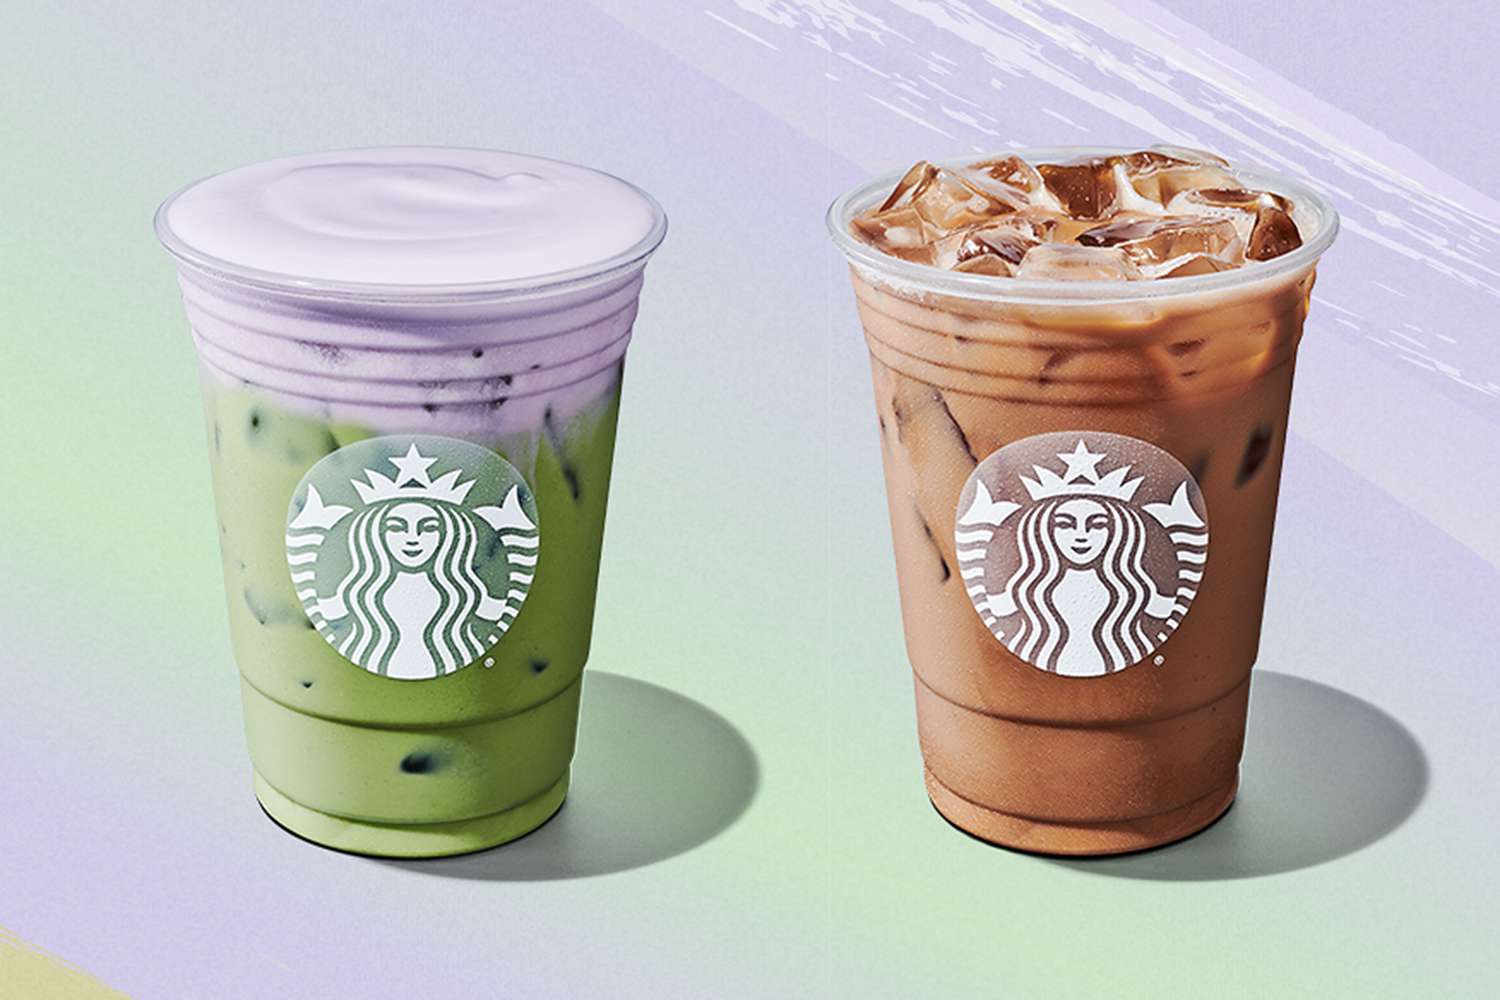 starbucks drinks are buy one get one free on thursday (yes, again!)